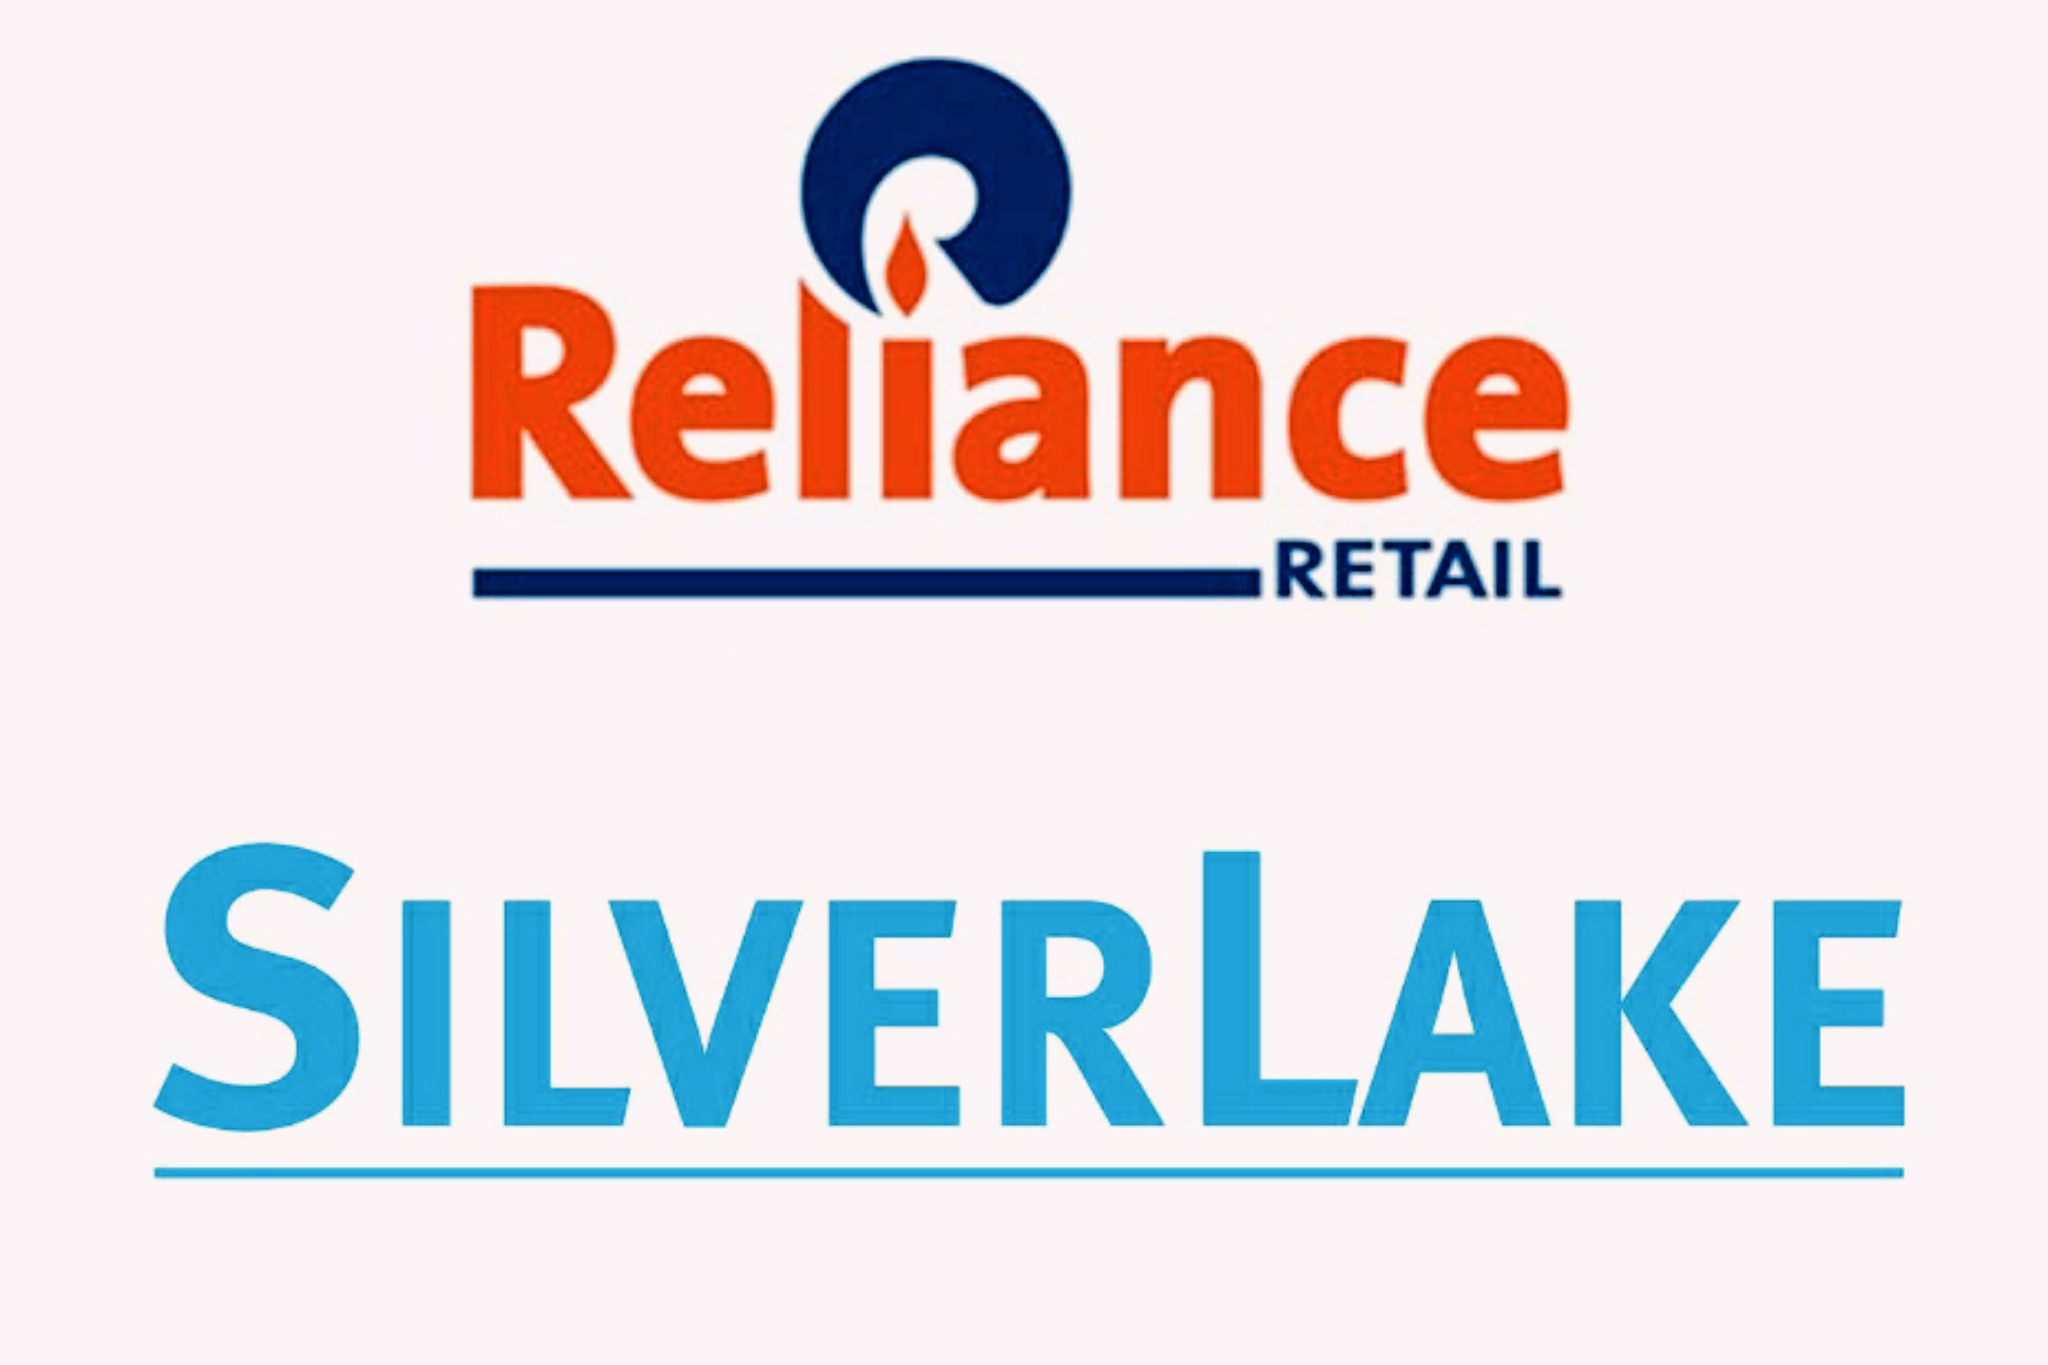 Silver Lake Partners invest ₹ 7,500 crores in Reliance Retail